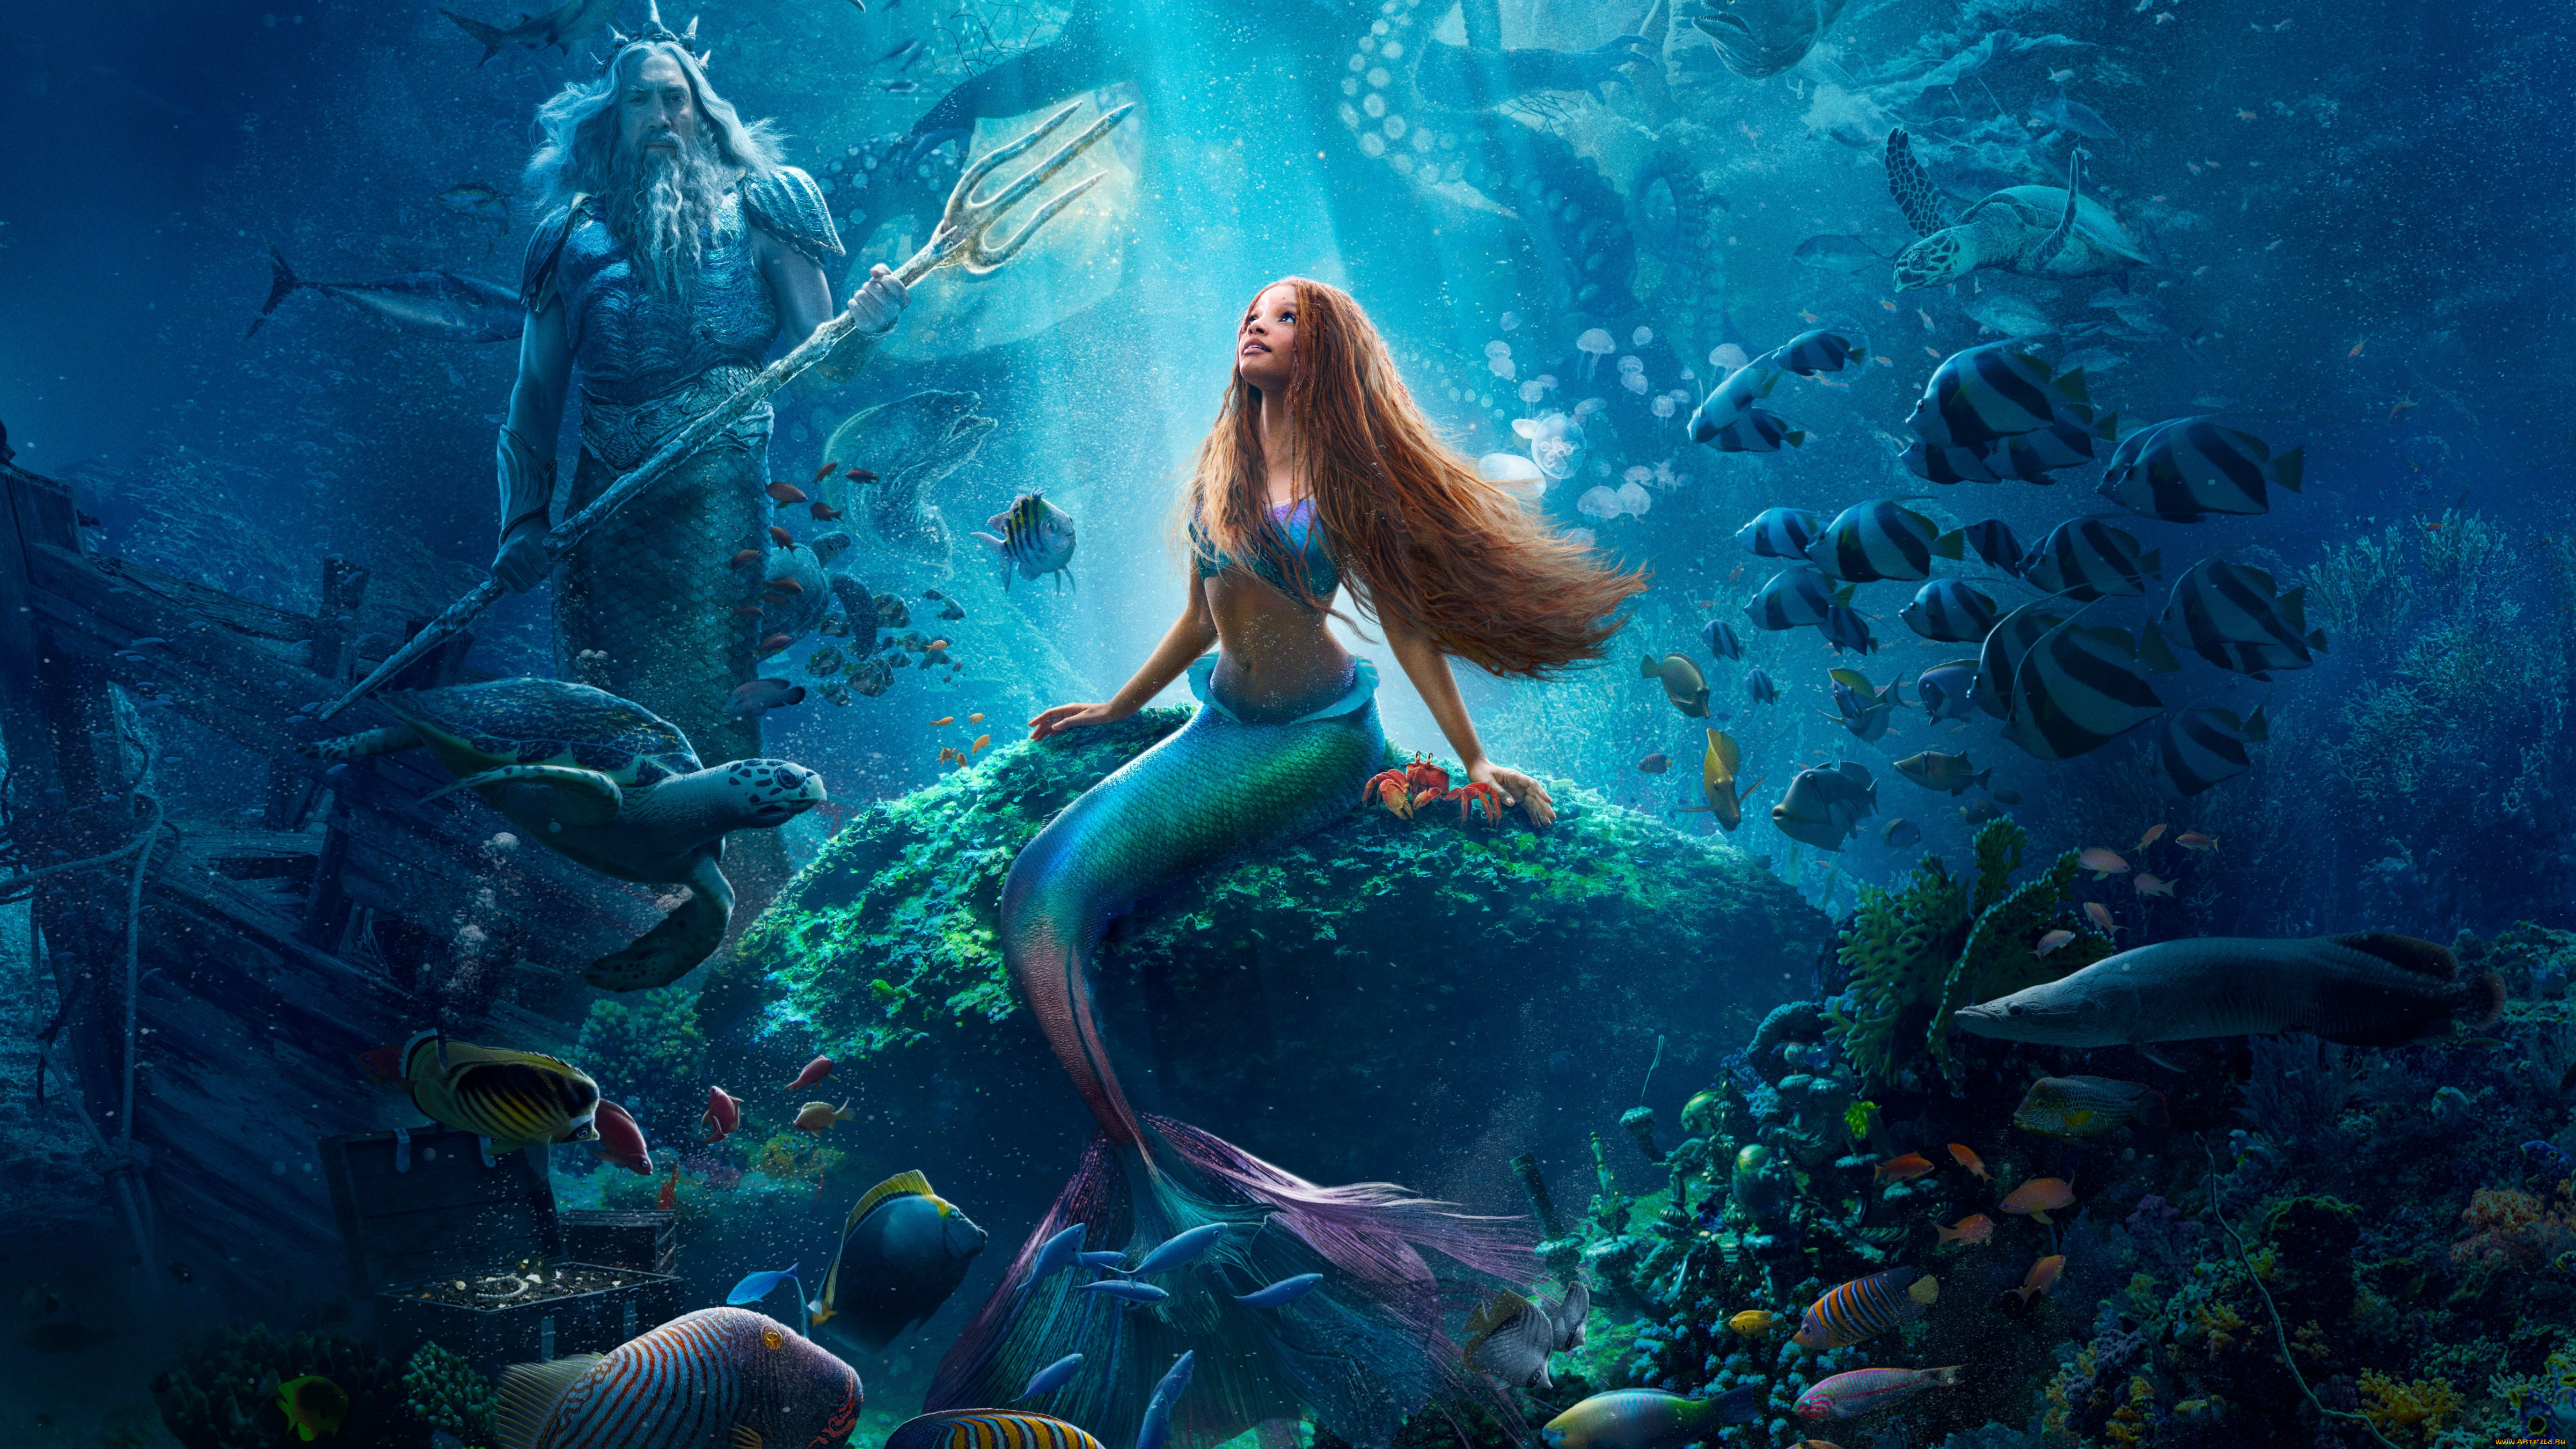  , -unknown , , the, little, mermaid, 